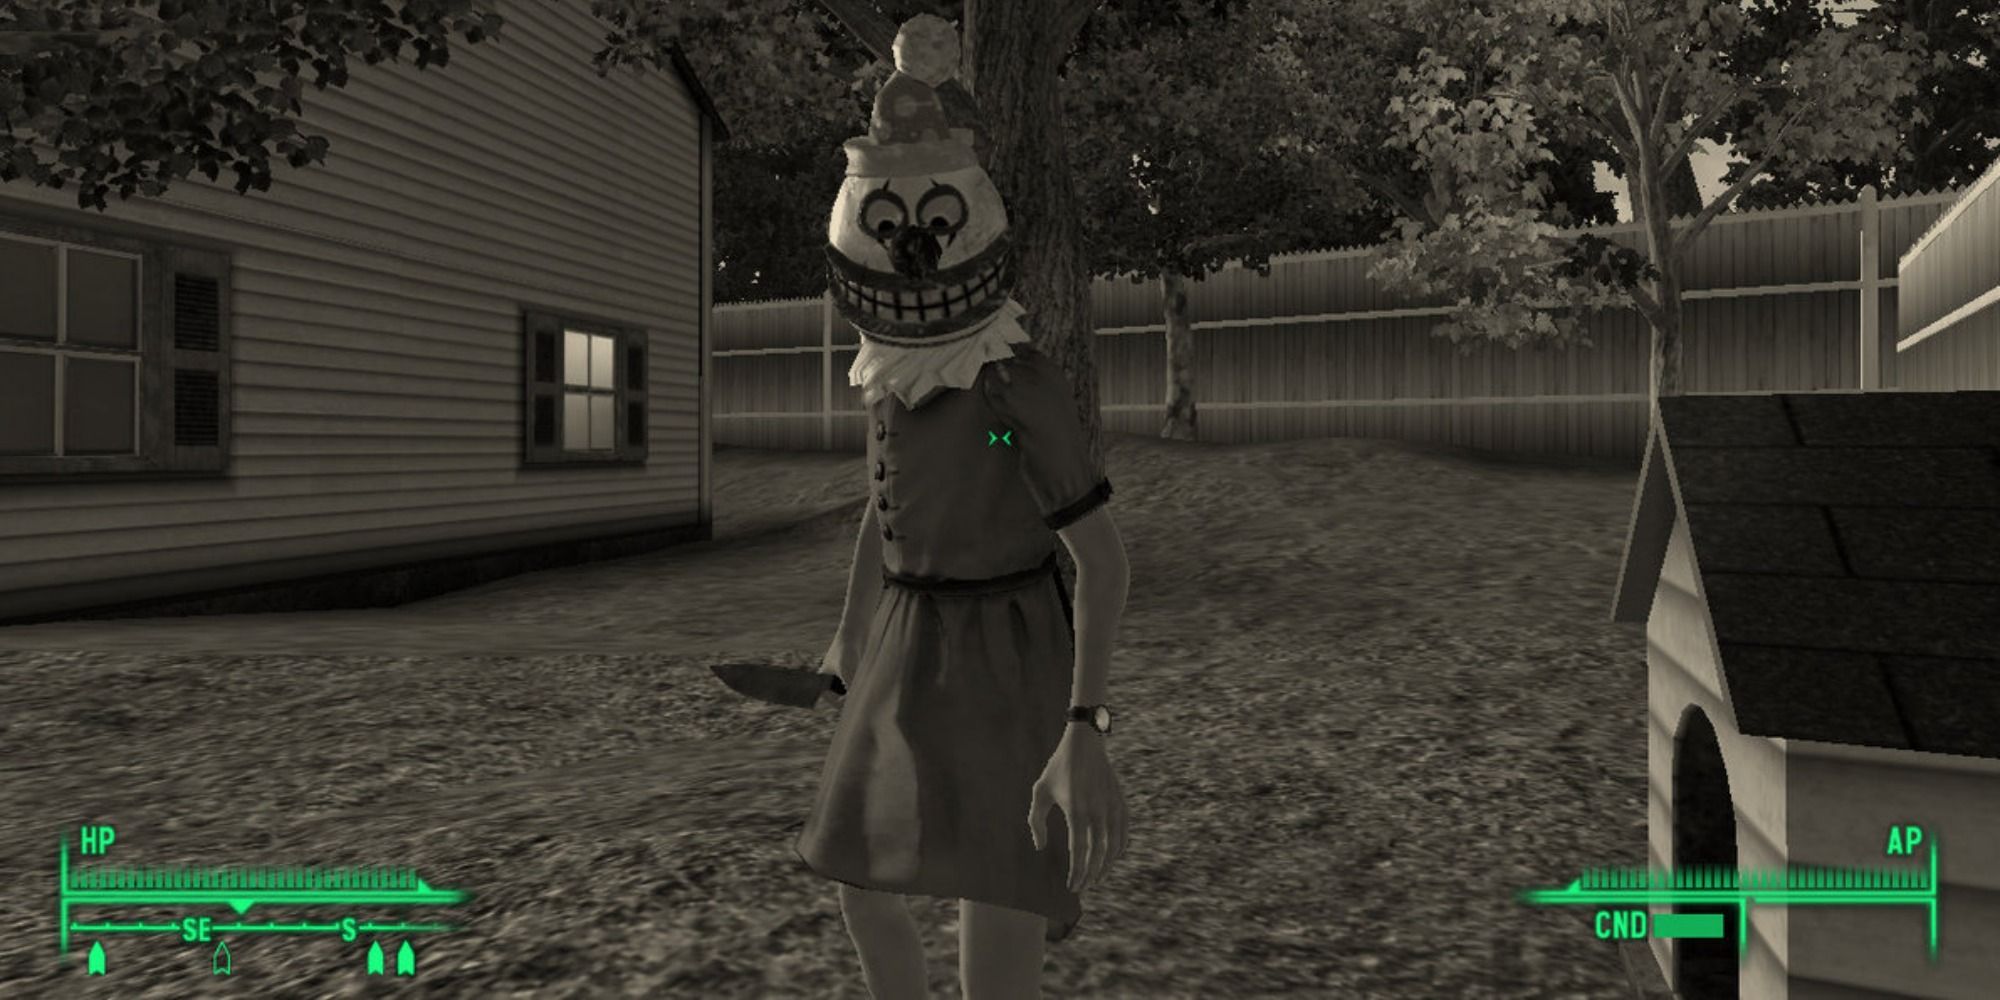 Vault 112 in simulation, clown mask character holding a knife